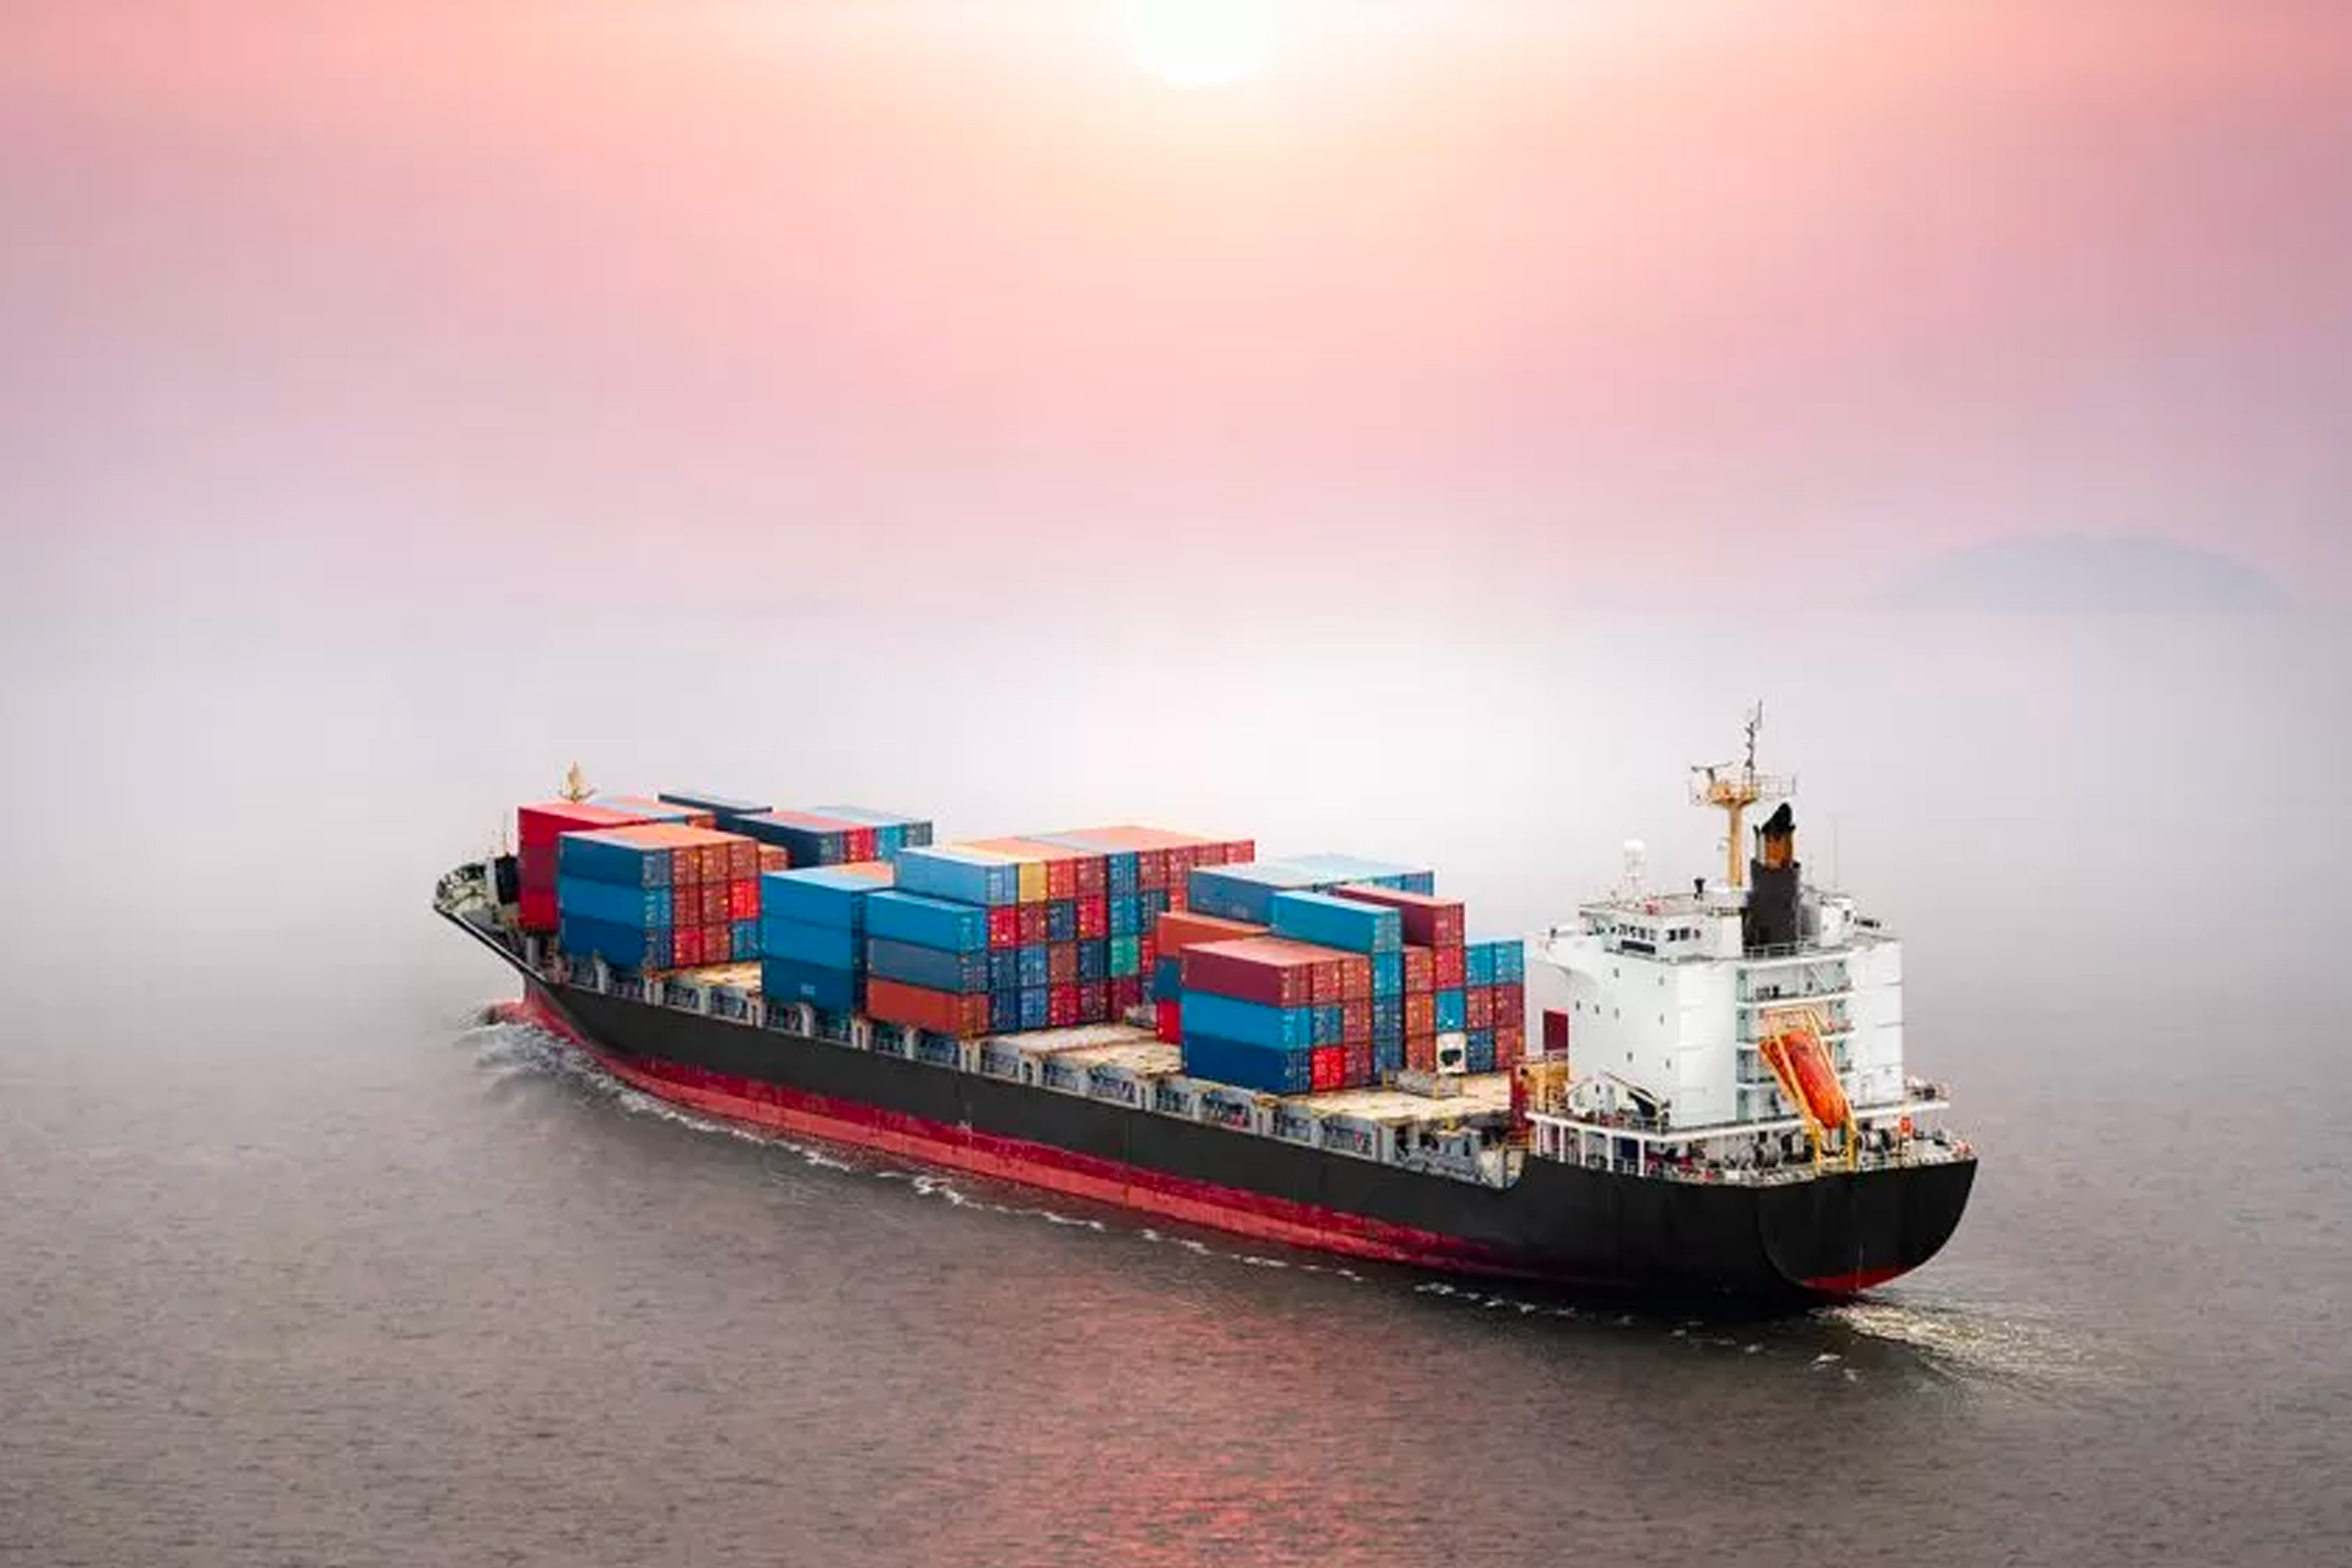 An image of a container ship to highlight the Accelleron maritime industry survey